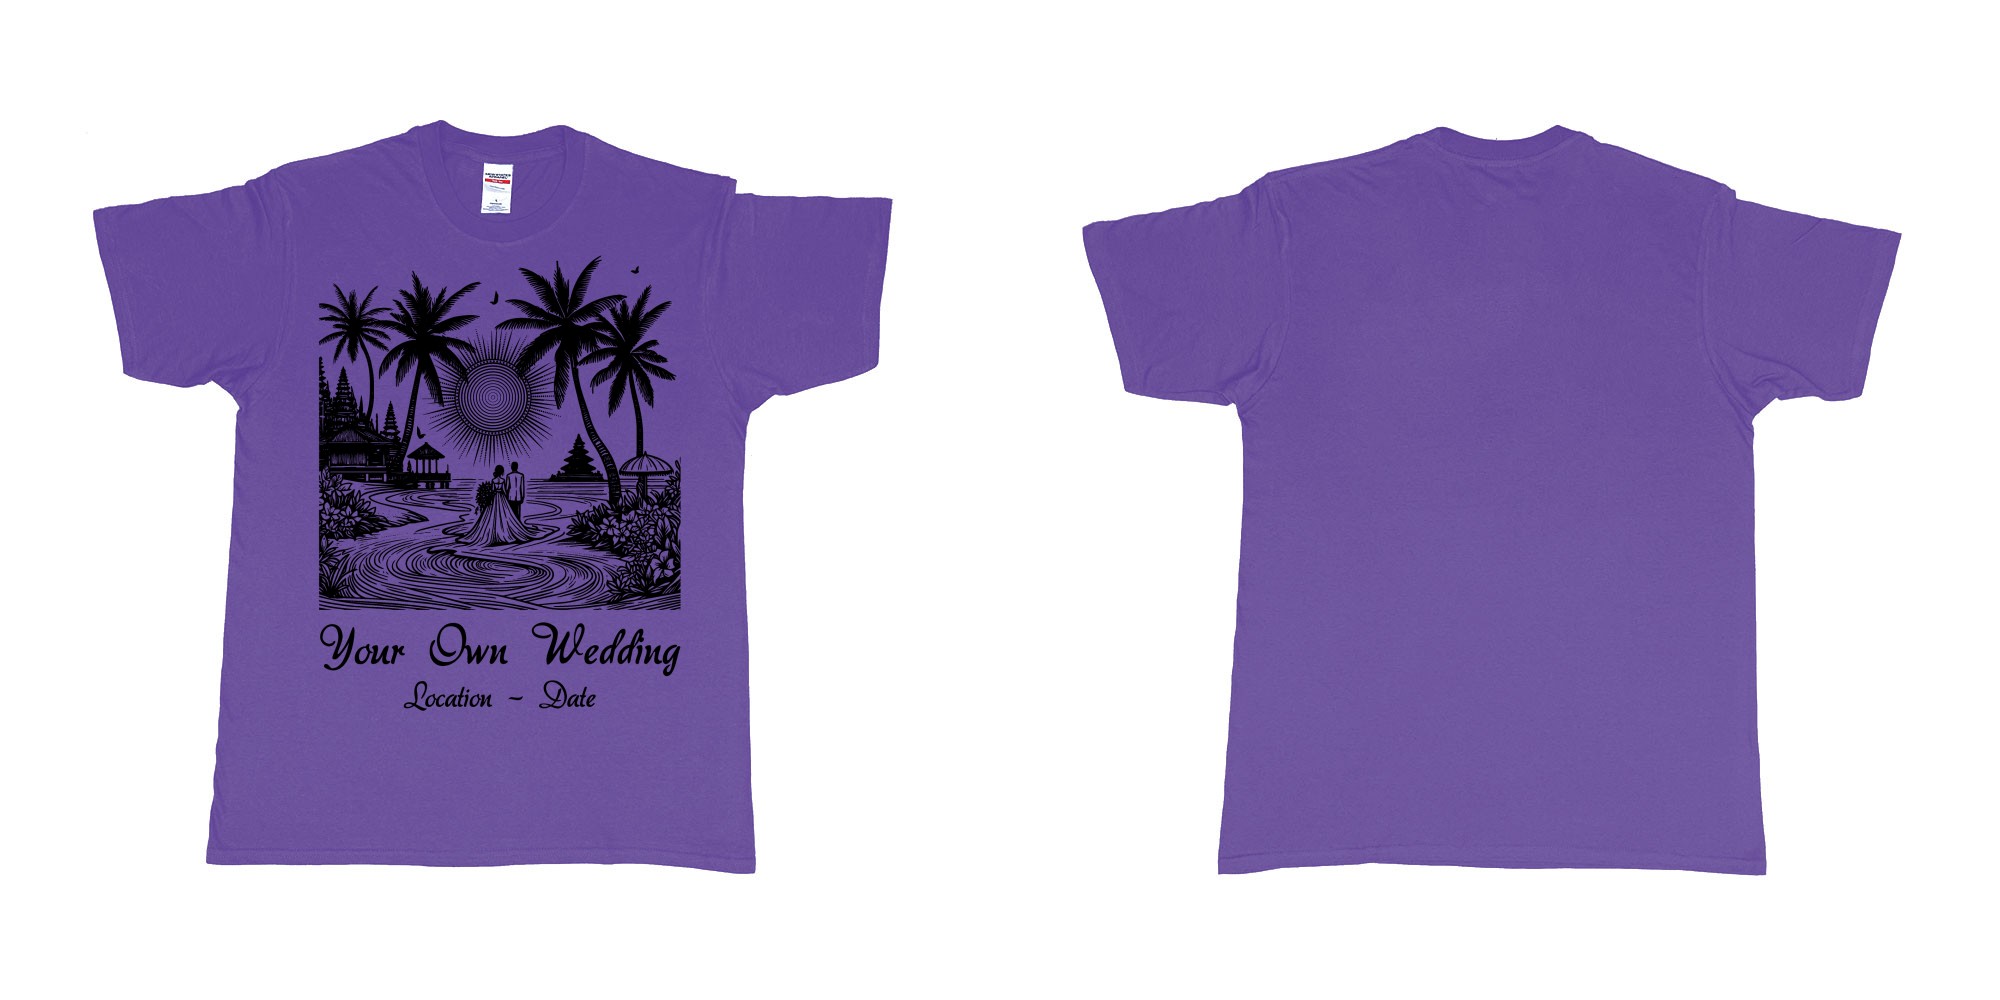 Custom tshirt design wedding couple drawing bali beach sea sunset custom printing souvenir gift in fabric color purple choice your own text made in Bali by The Pirate Way